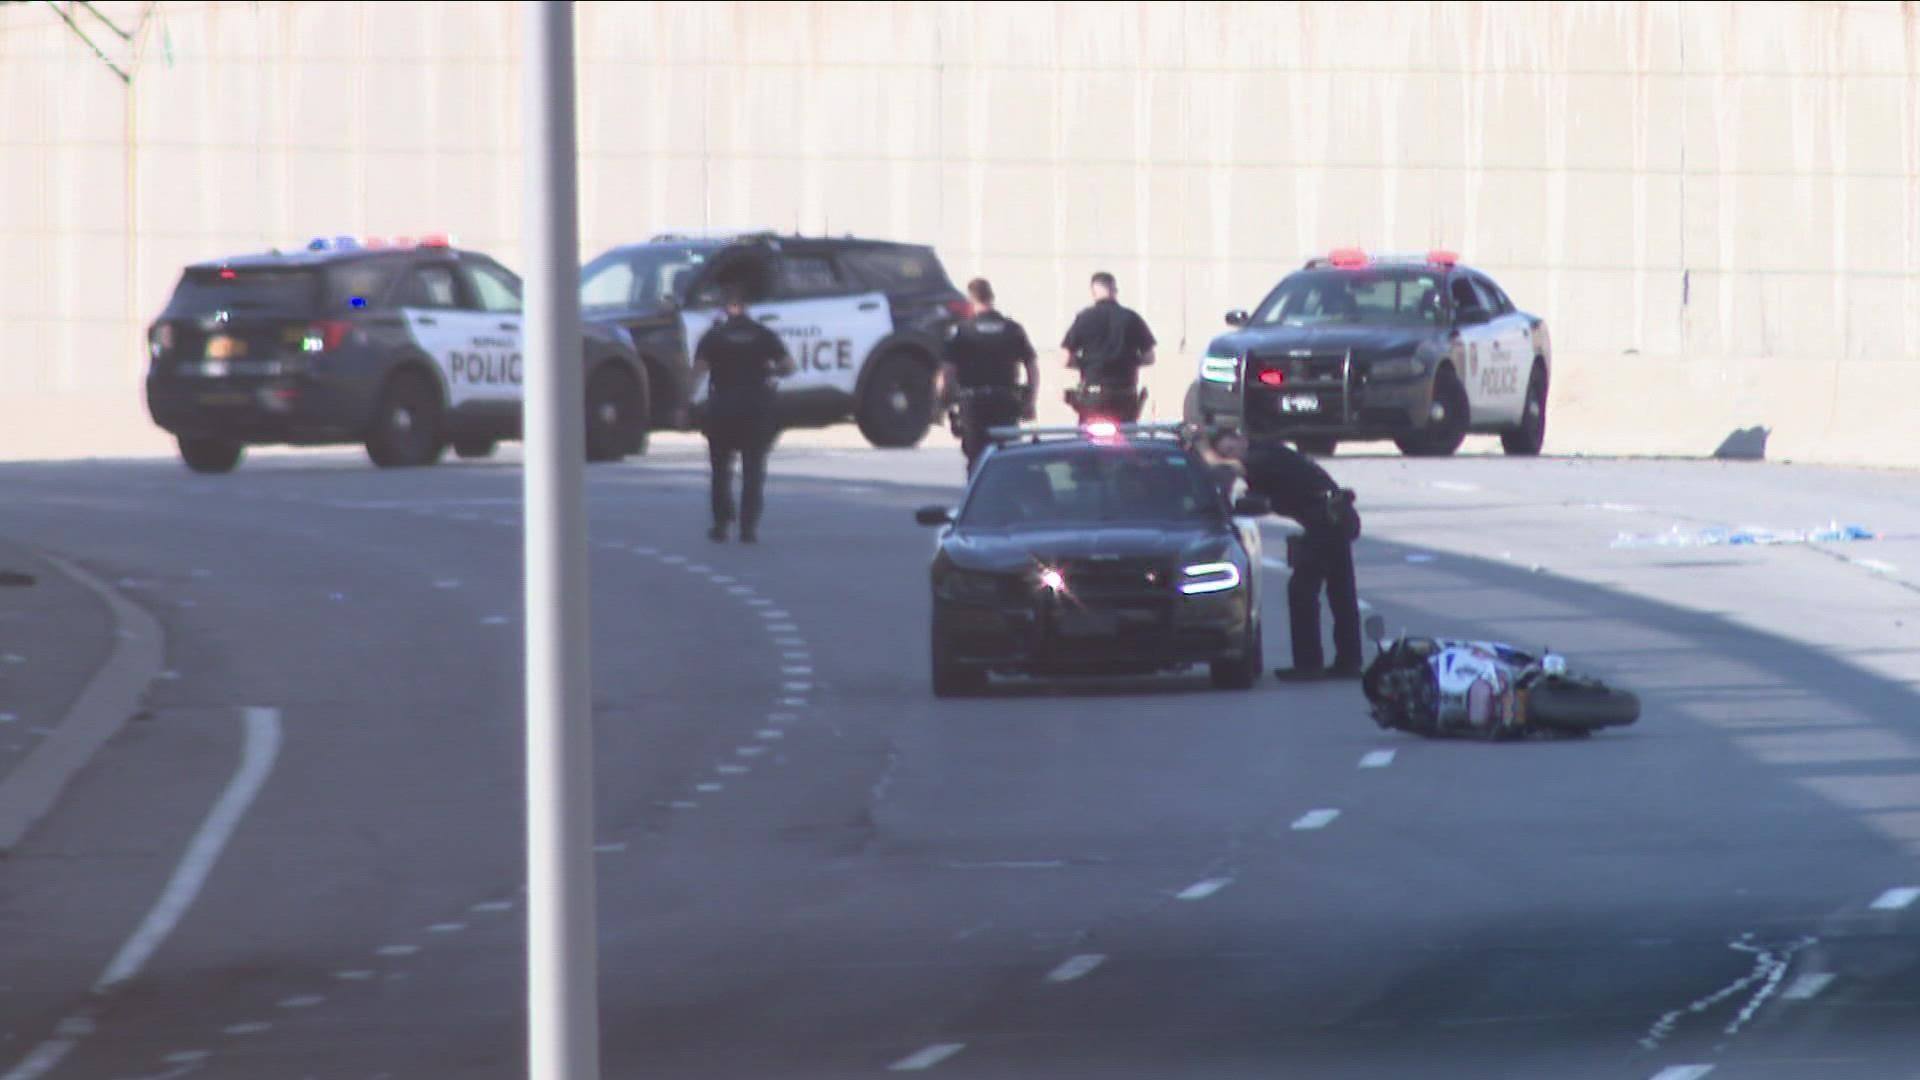 Buffalo police say a 21-year-old man has died after a motorcycle crash on the Kensington Expressway Saturday.